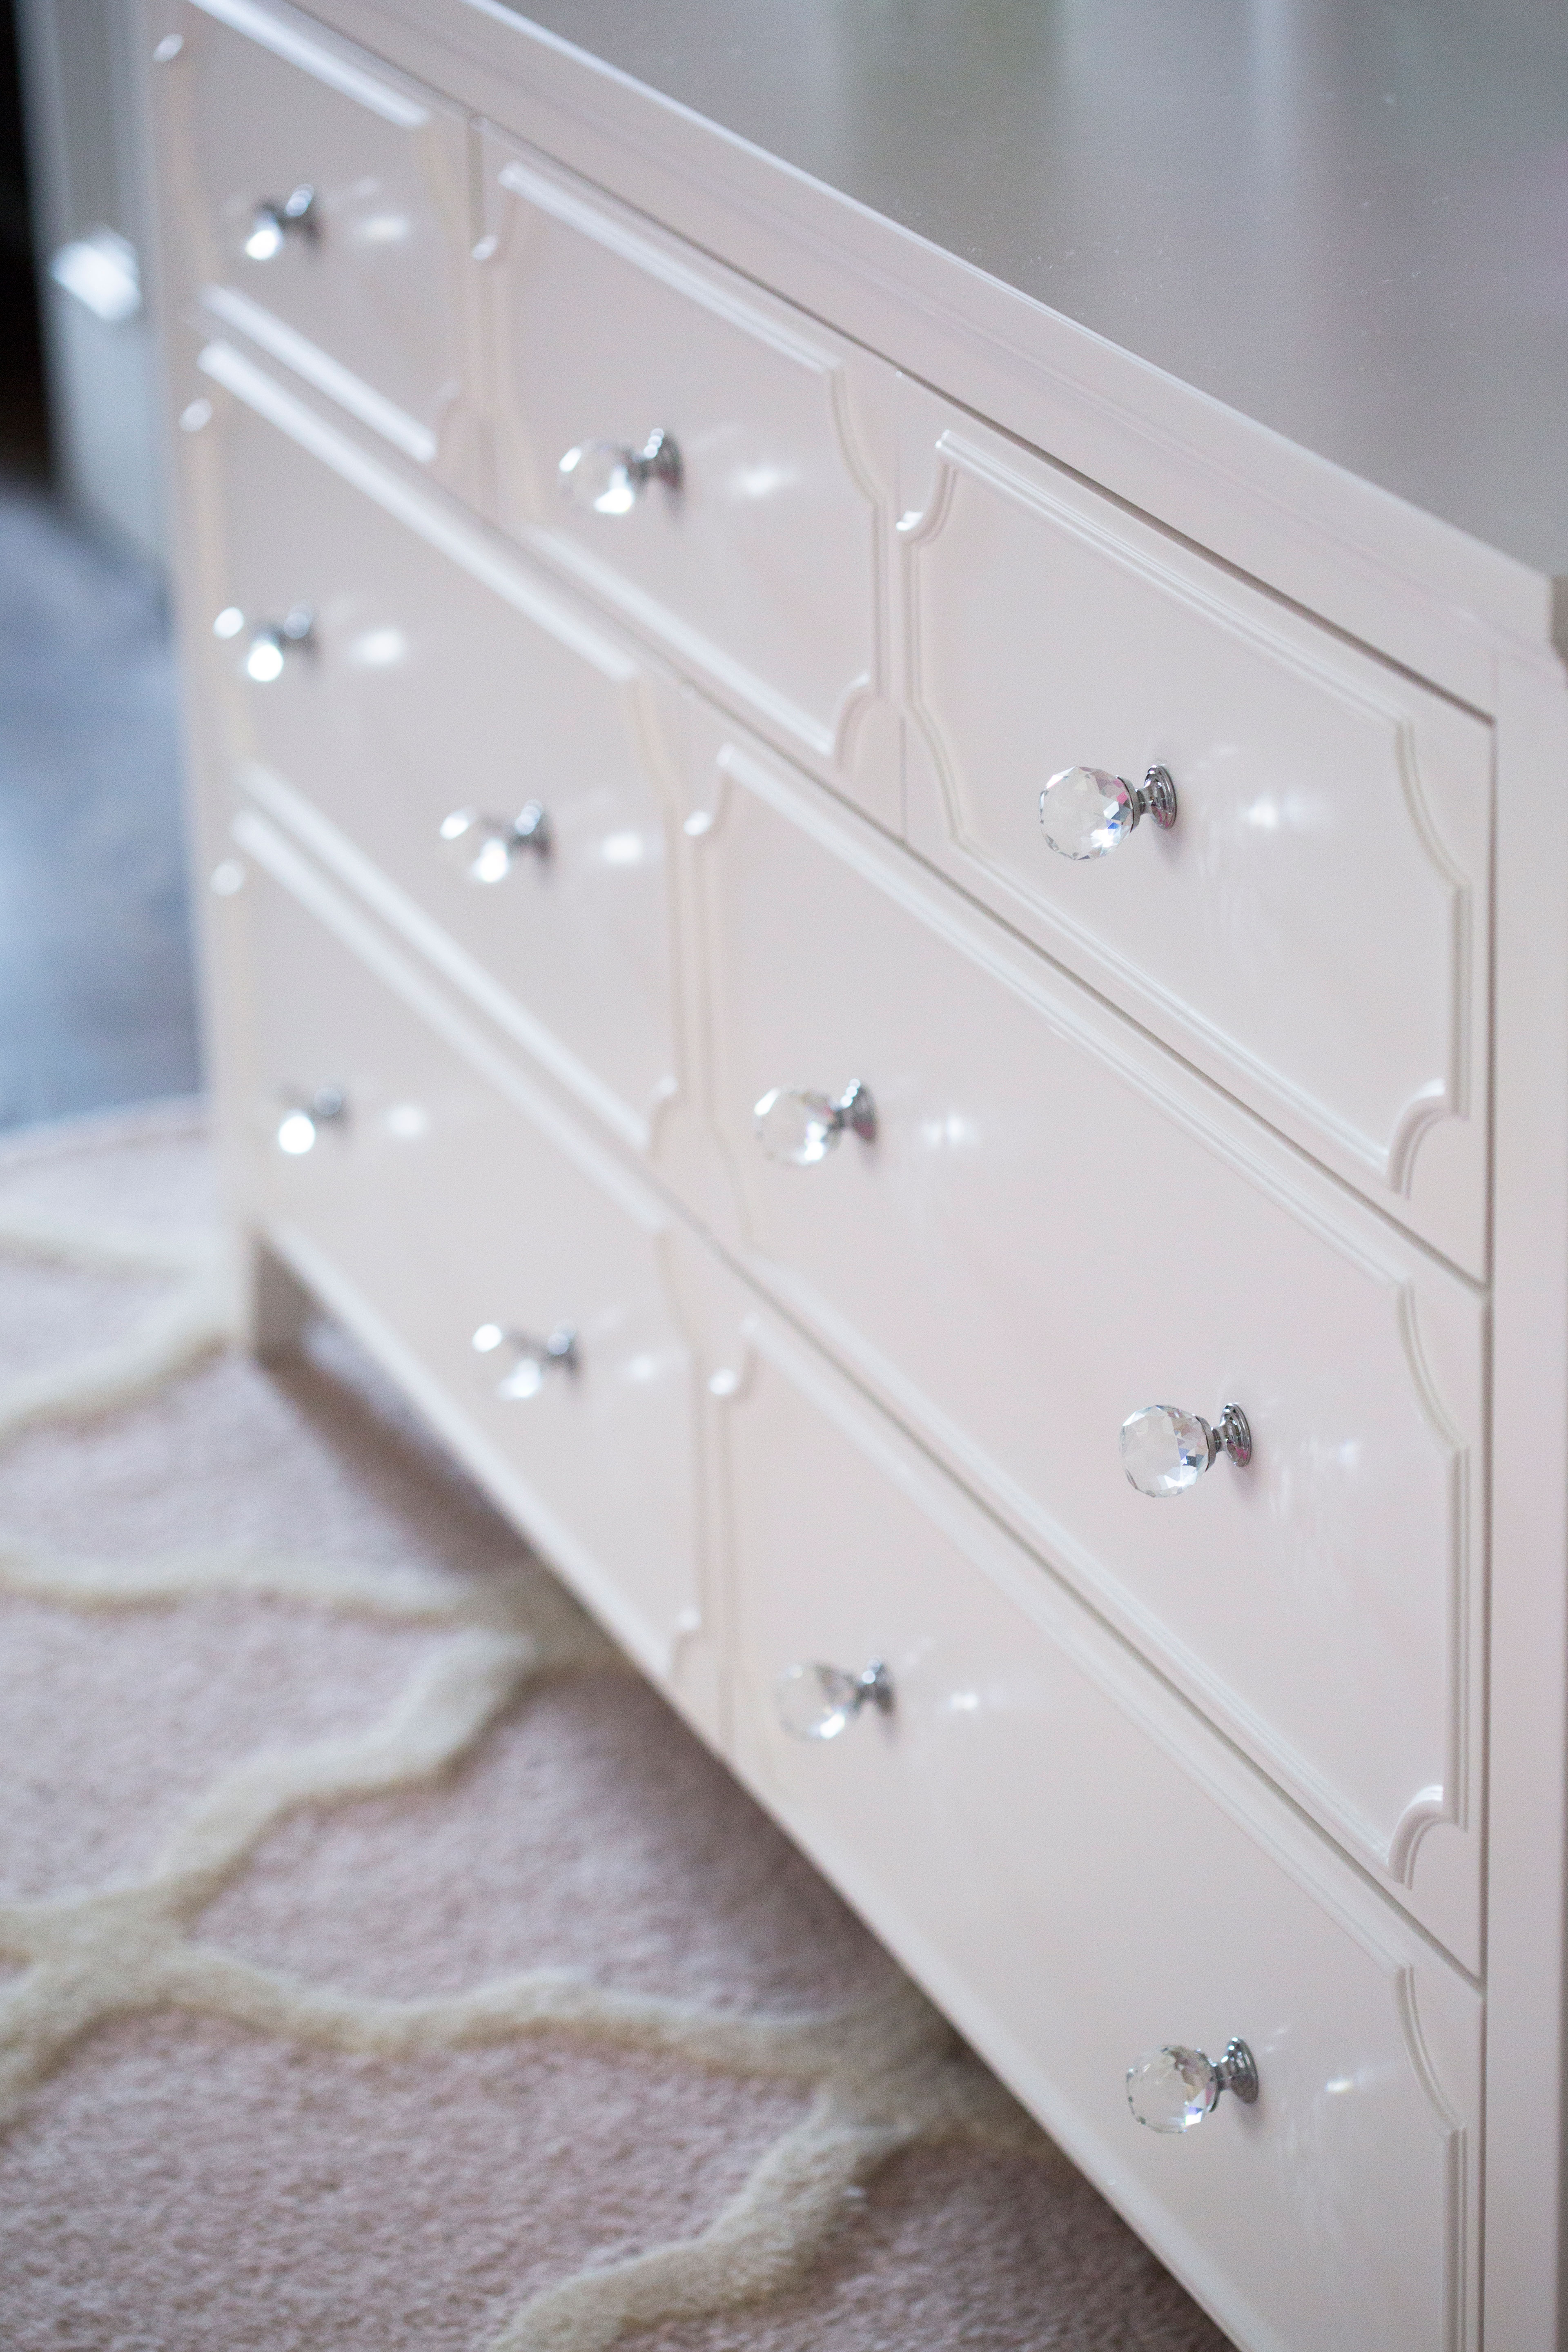 3 Over 4 Drawer Dresser White Craft Bedroom Furniture pertaining to measurements 3840 X 5760